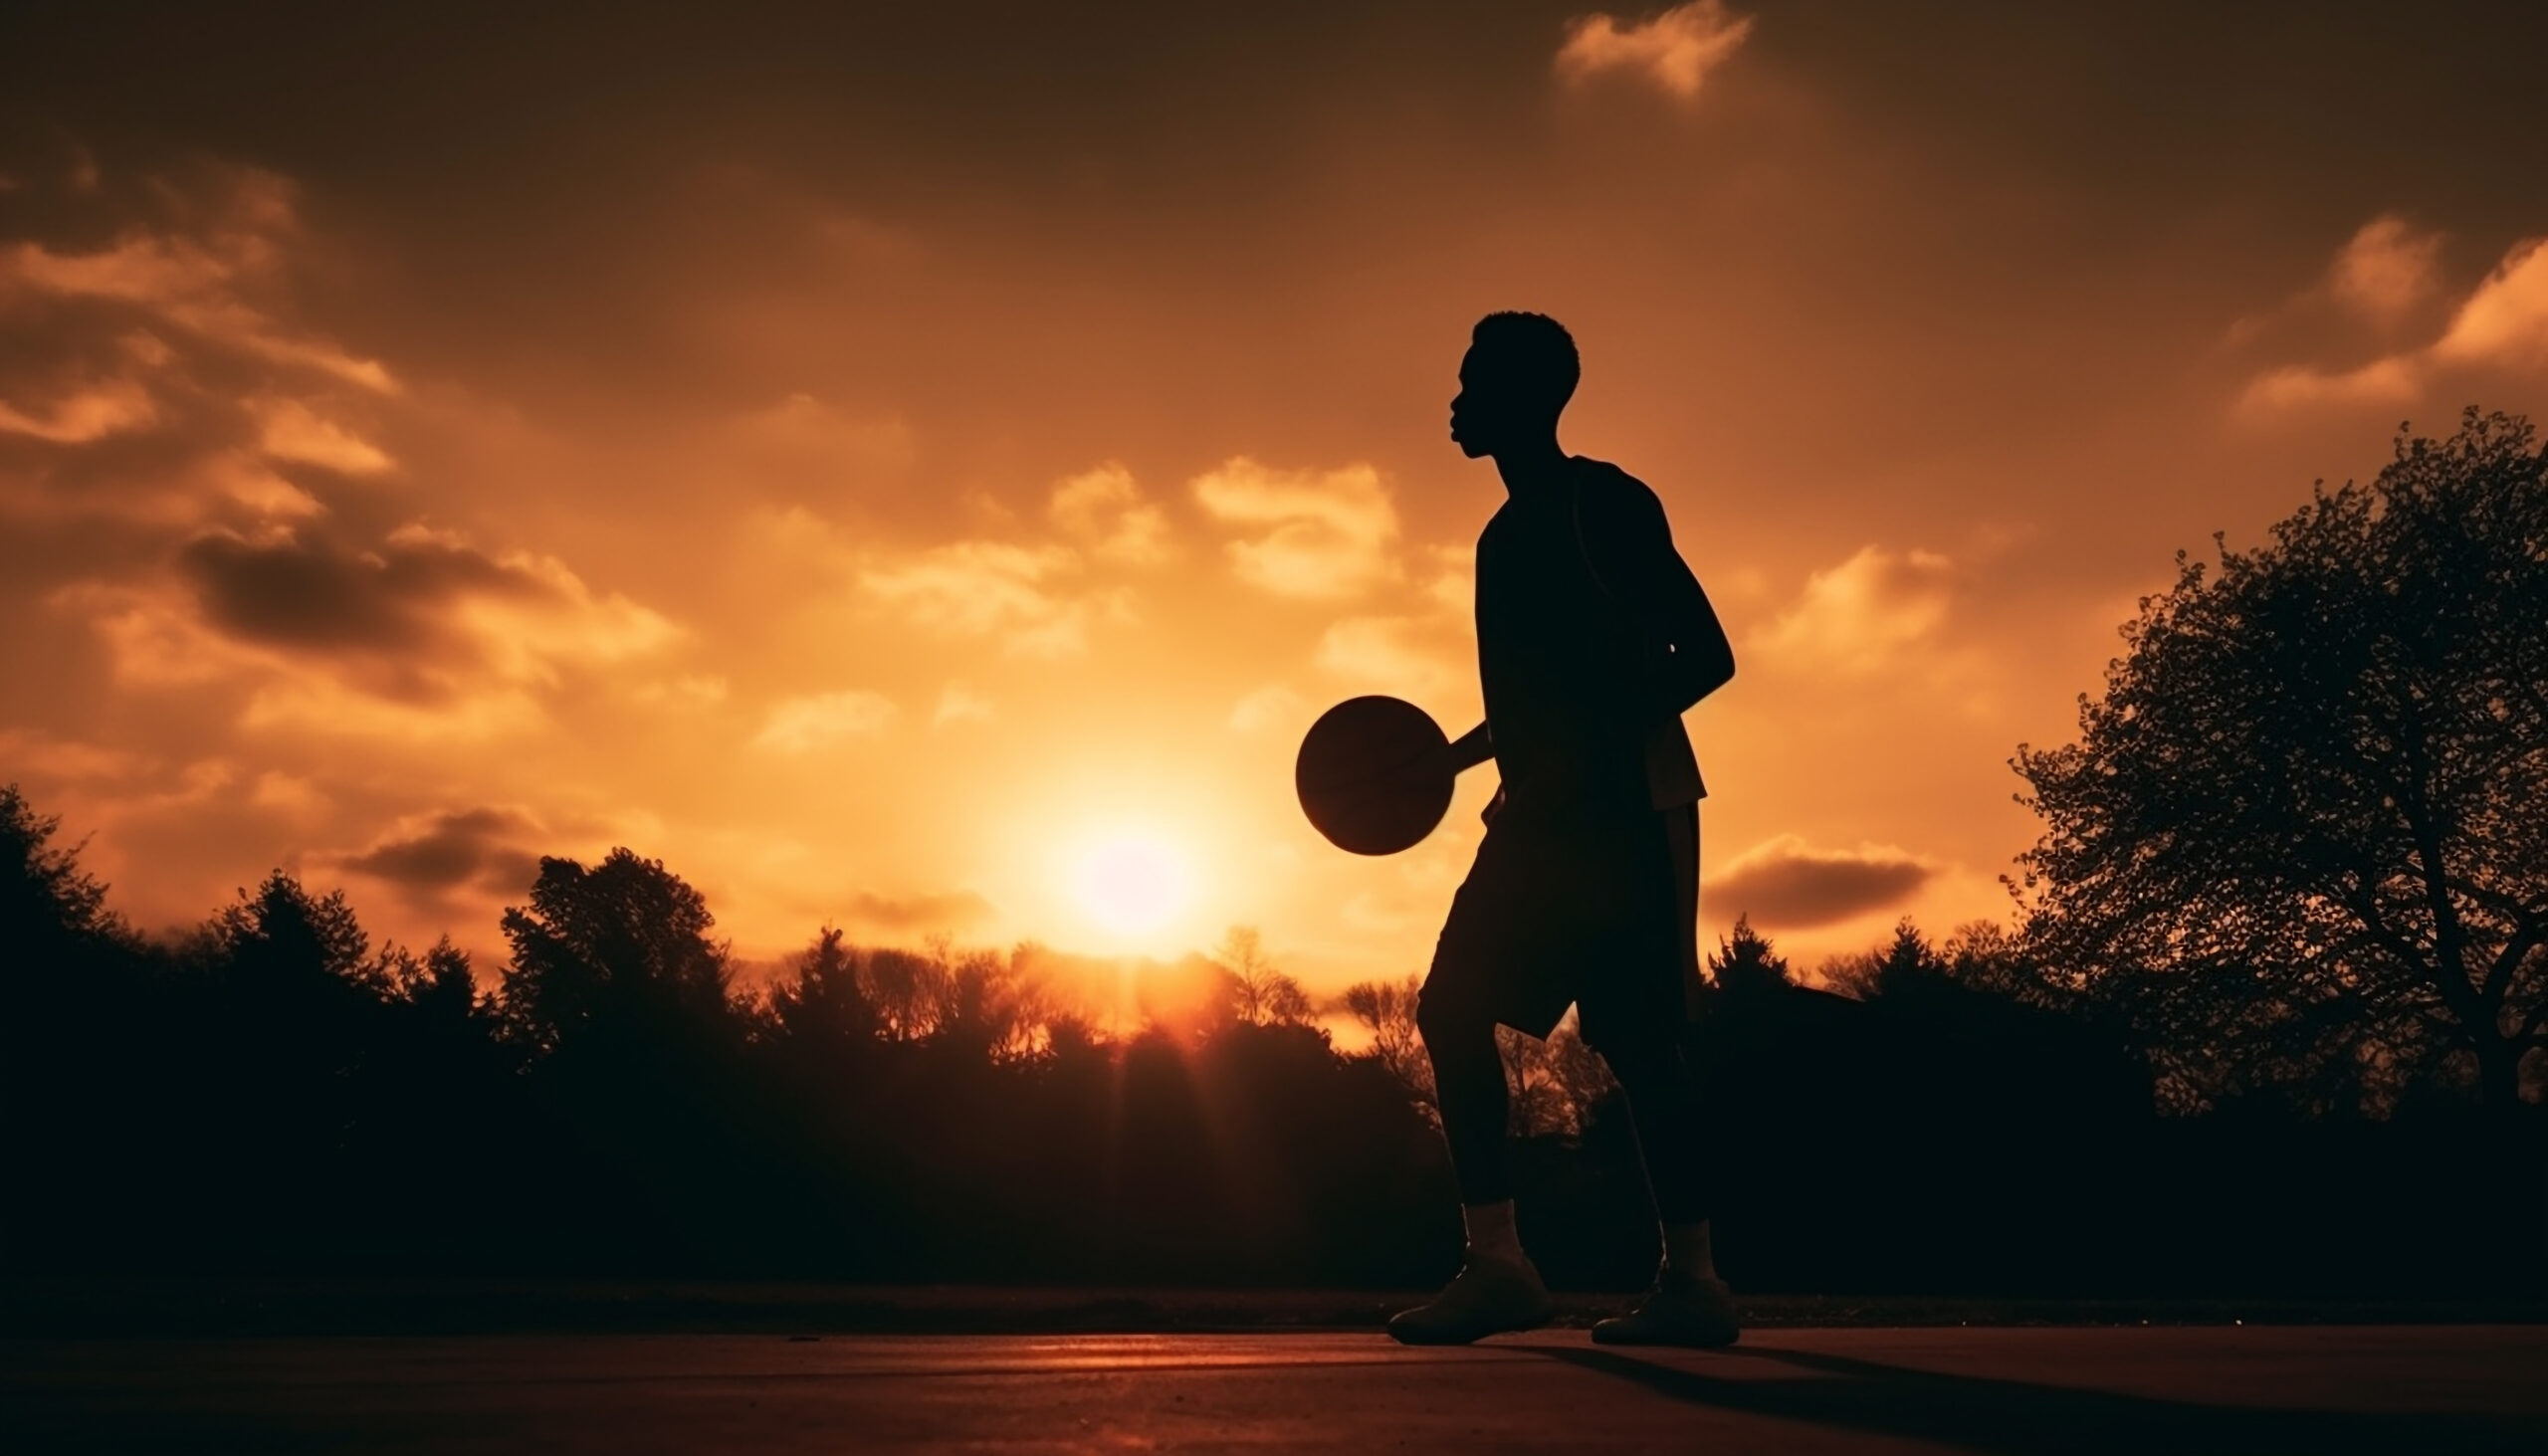 Silhouette of men playing ball at sunset generated by artificial intelligence